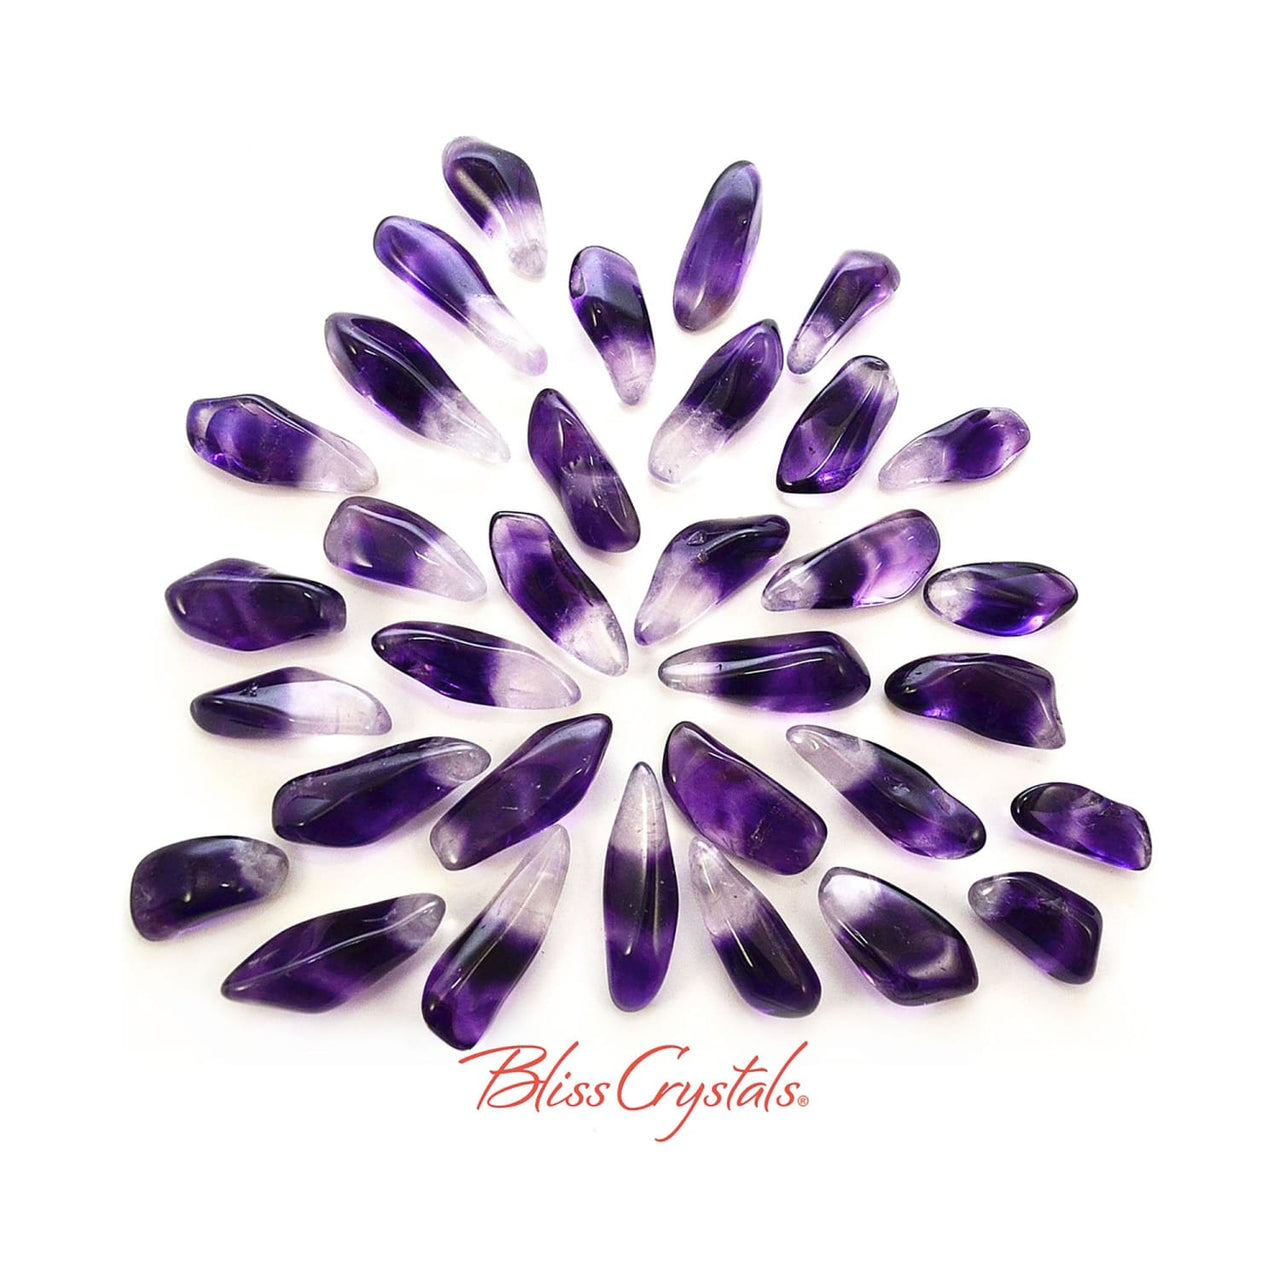 5 Small GEM Amethyst Tumbled Stone (Dogtooth) Mini Banded 